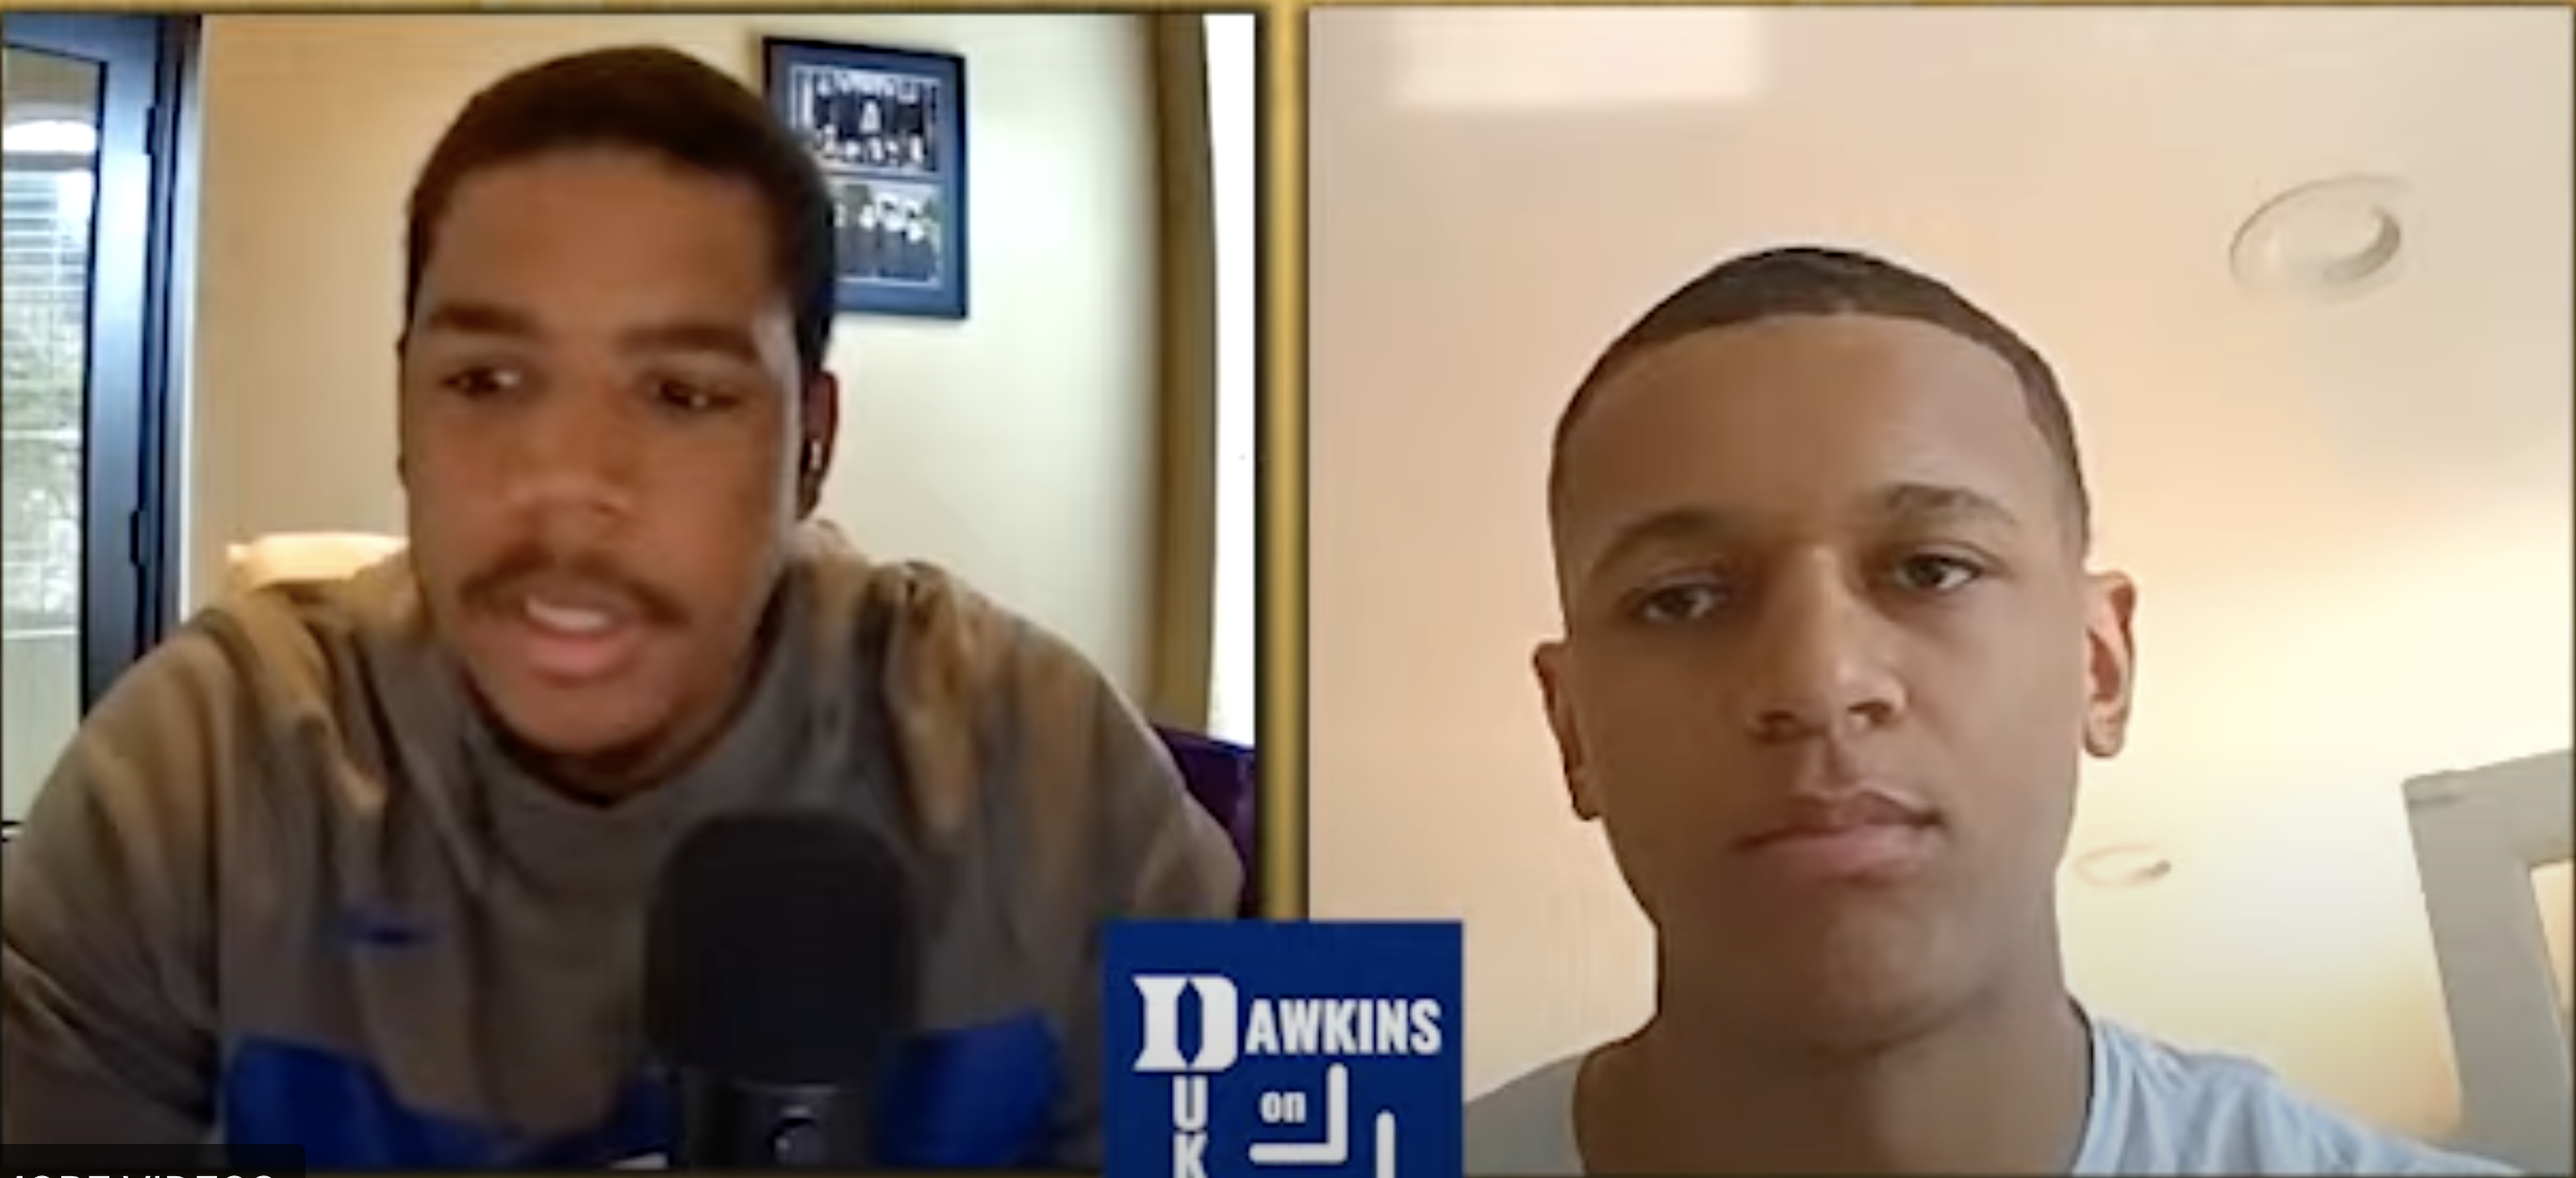 @dre_dawkins Goes One on One with Duke Commit @Pp_doesit (Paolo Banchero)